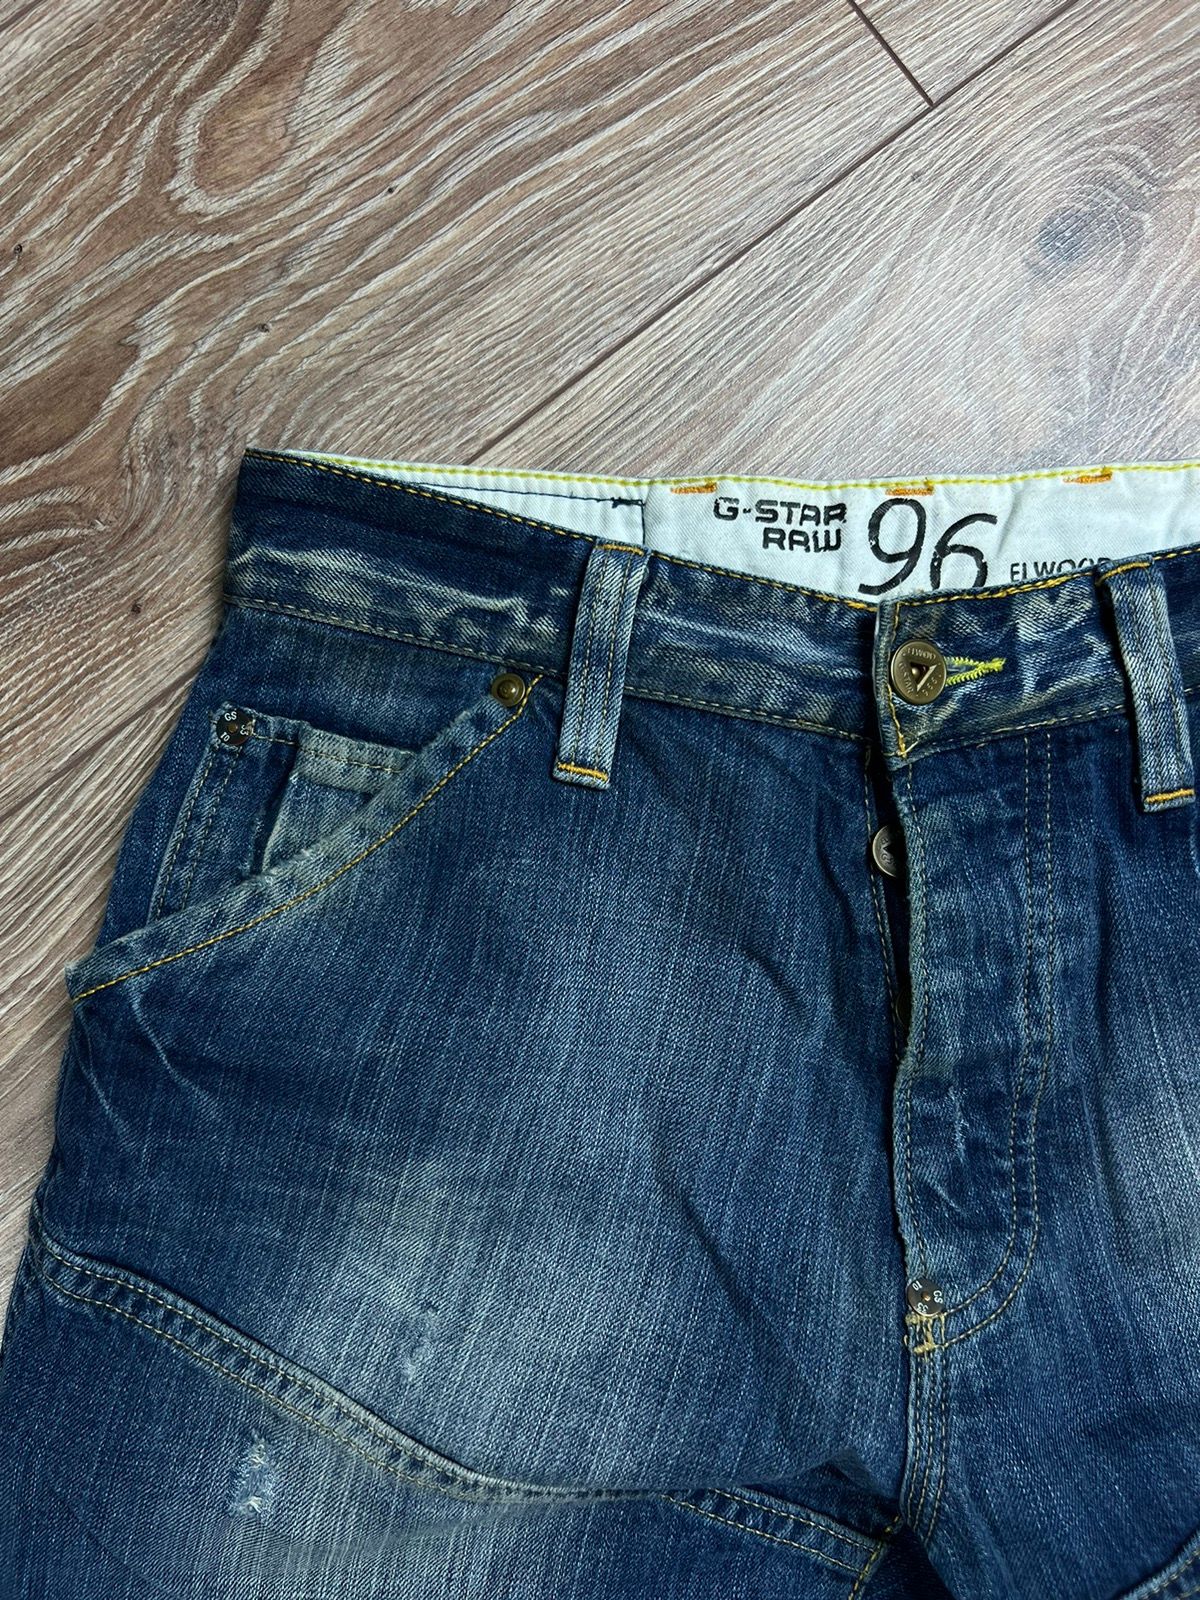 Vintage 💫 90’S G-STAR RAW VINTAGE DOUBLE KNEE OPIUM WASHED JEANS Size US 30 / EU 46 - 8 Thumbnail